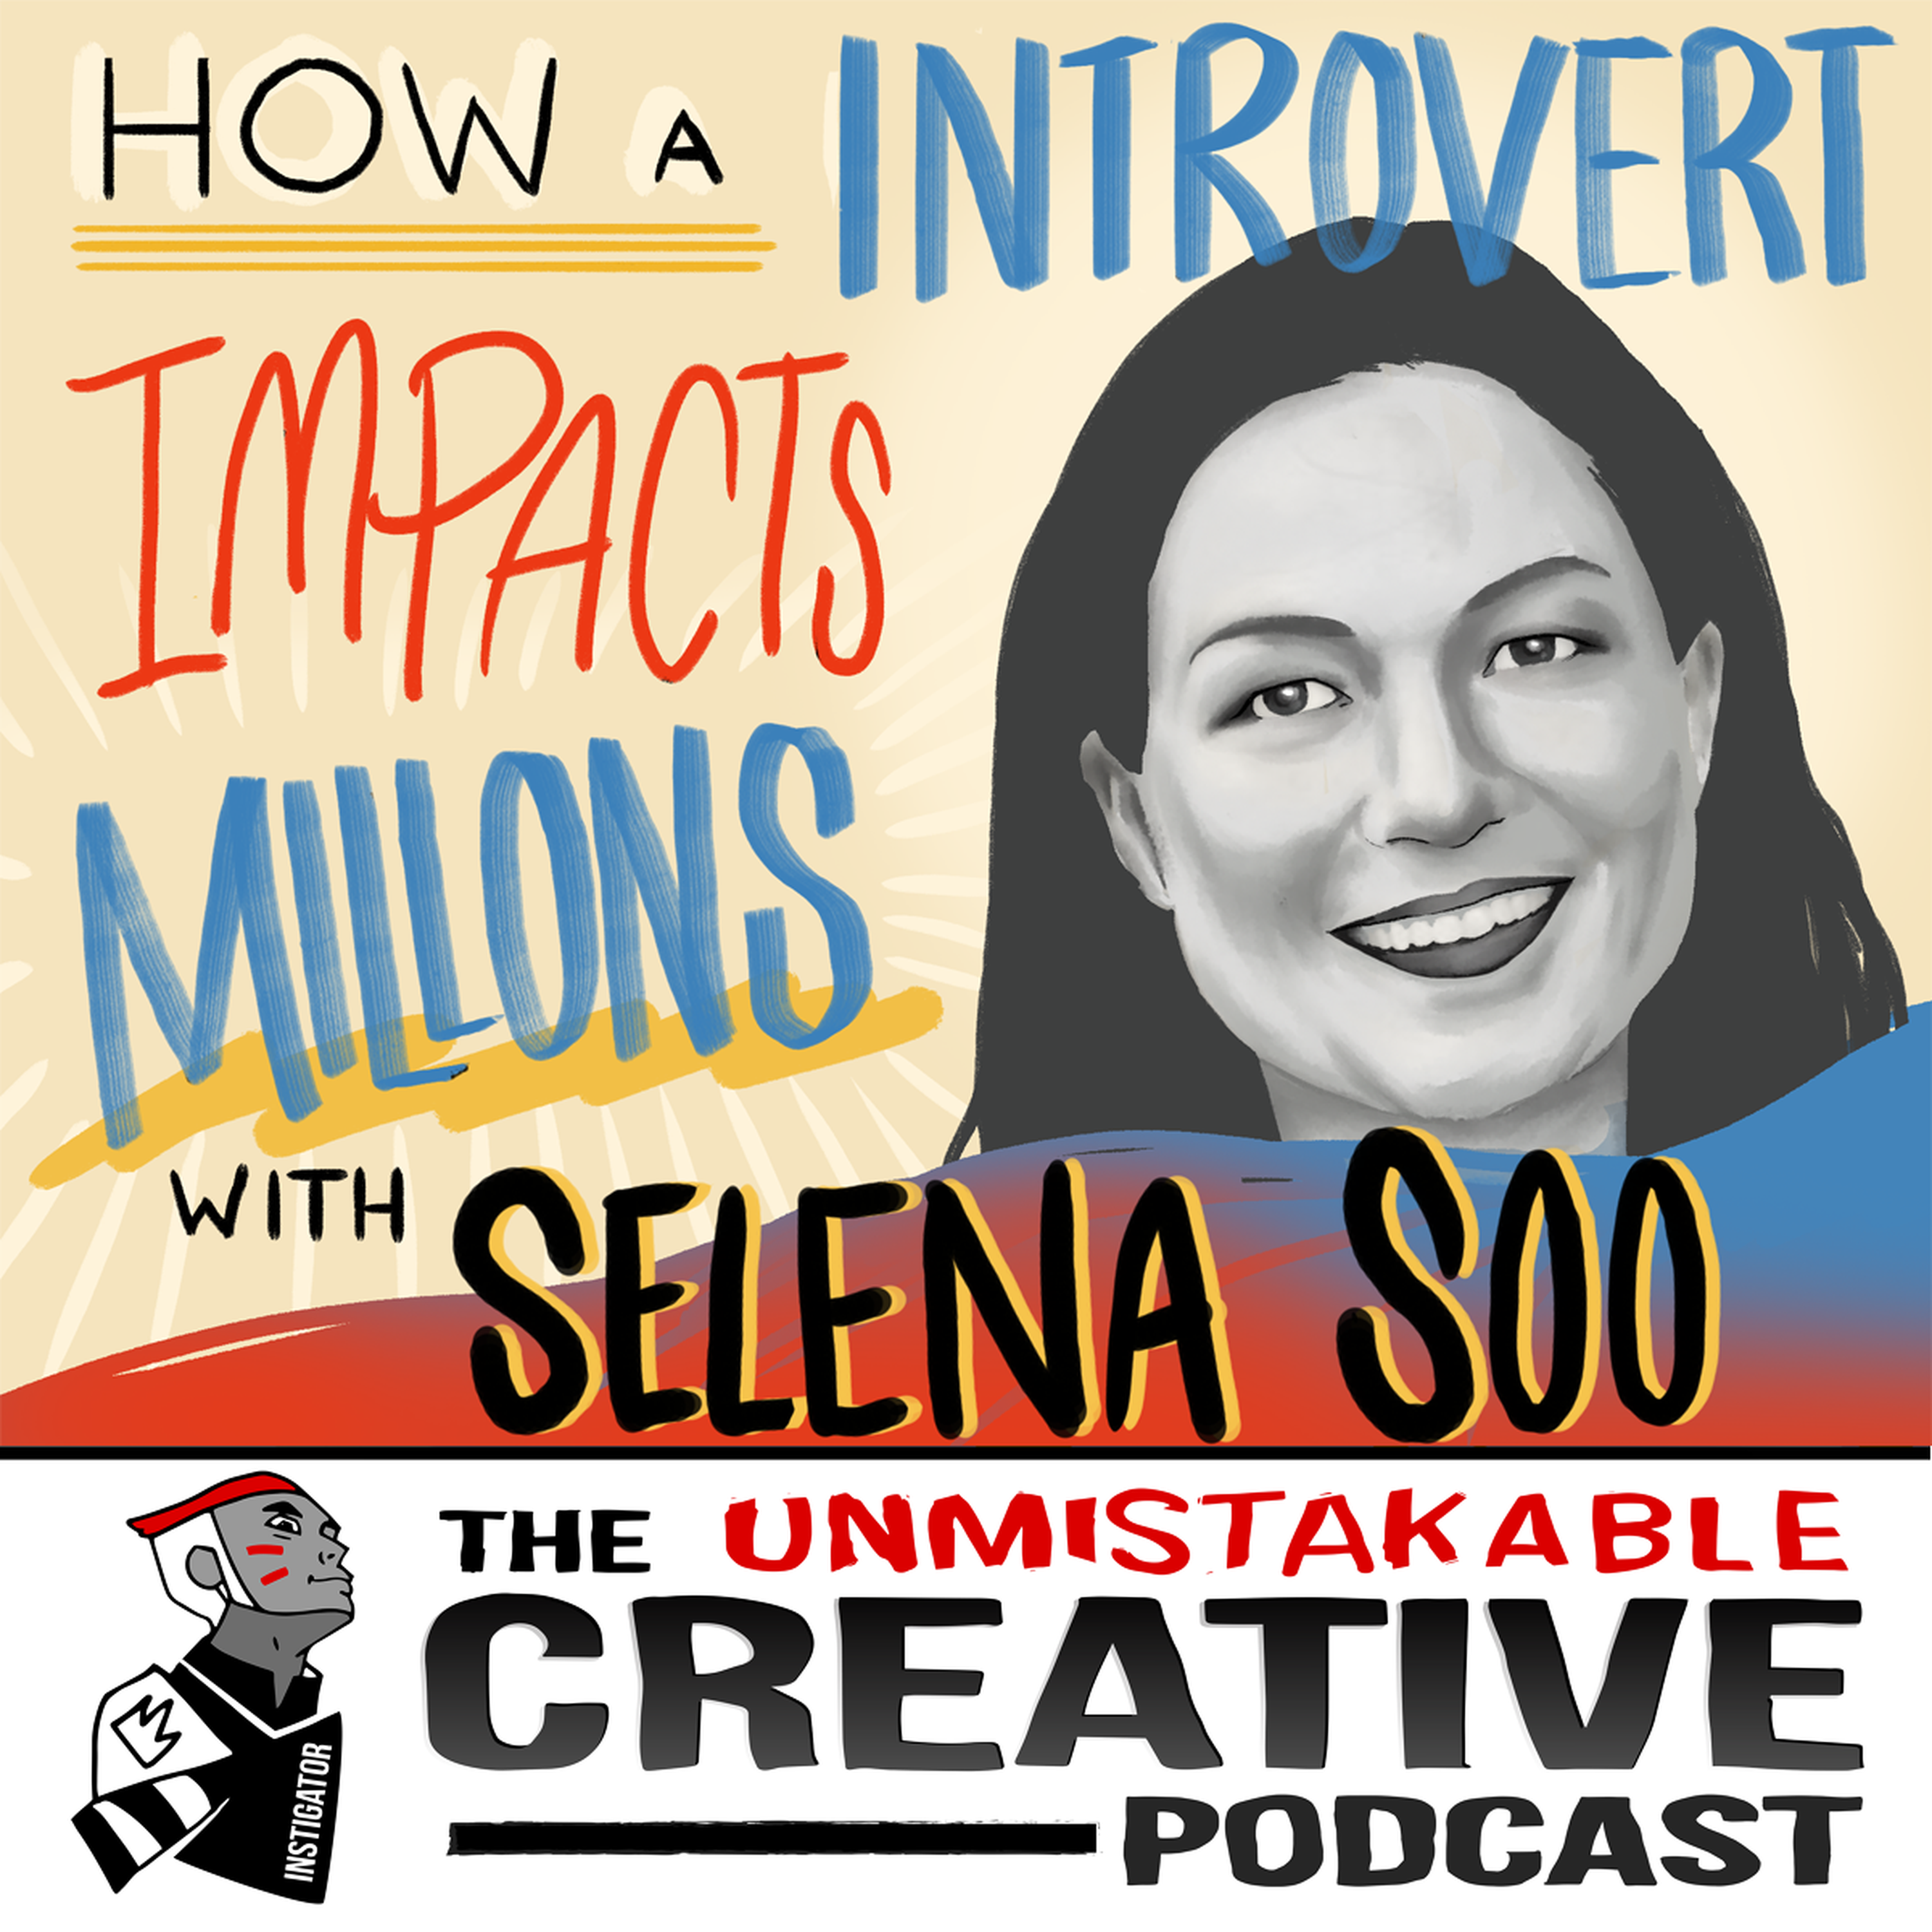 Selena Soo: How an Introvert Impacts Millions Image